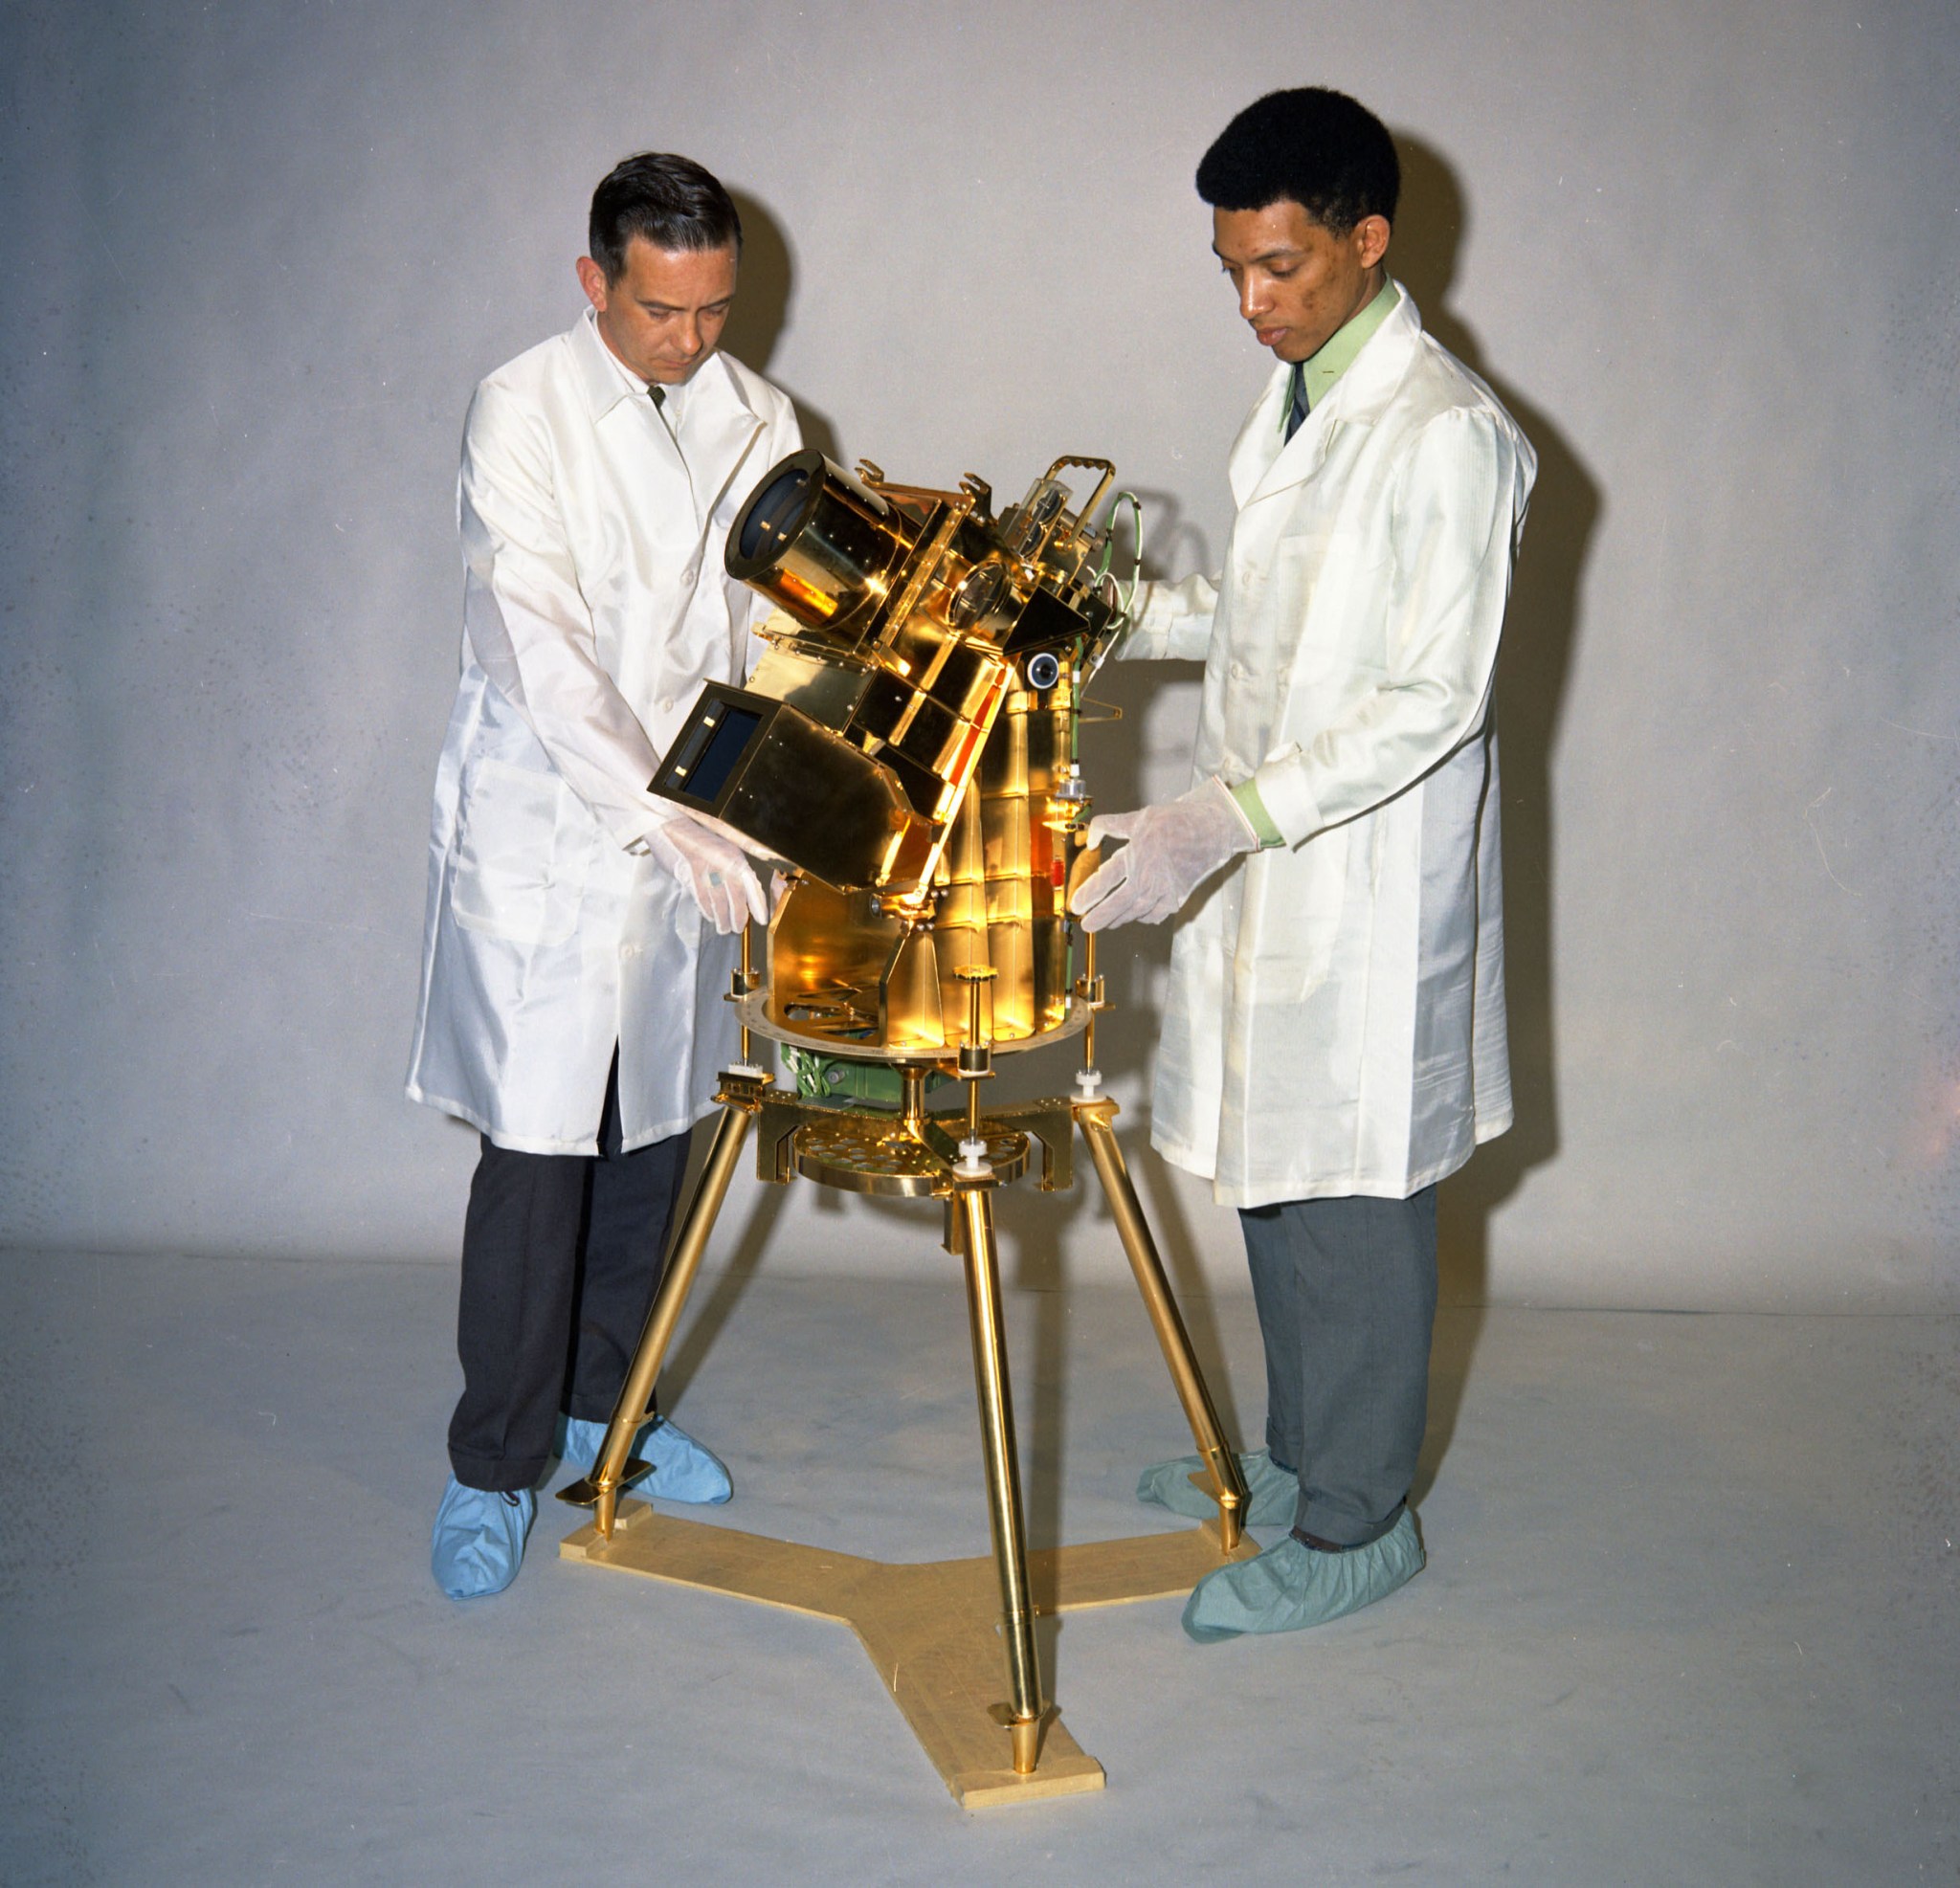 Gold-plated ultraviolet camera/spectrograph for Apollo 16